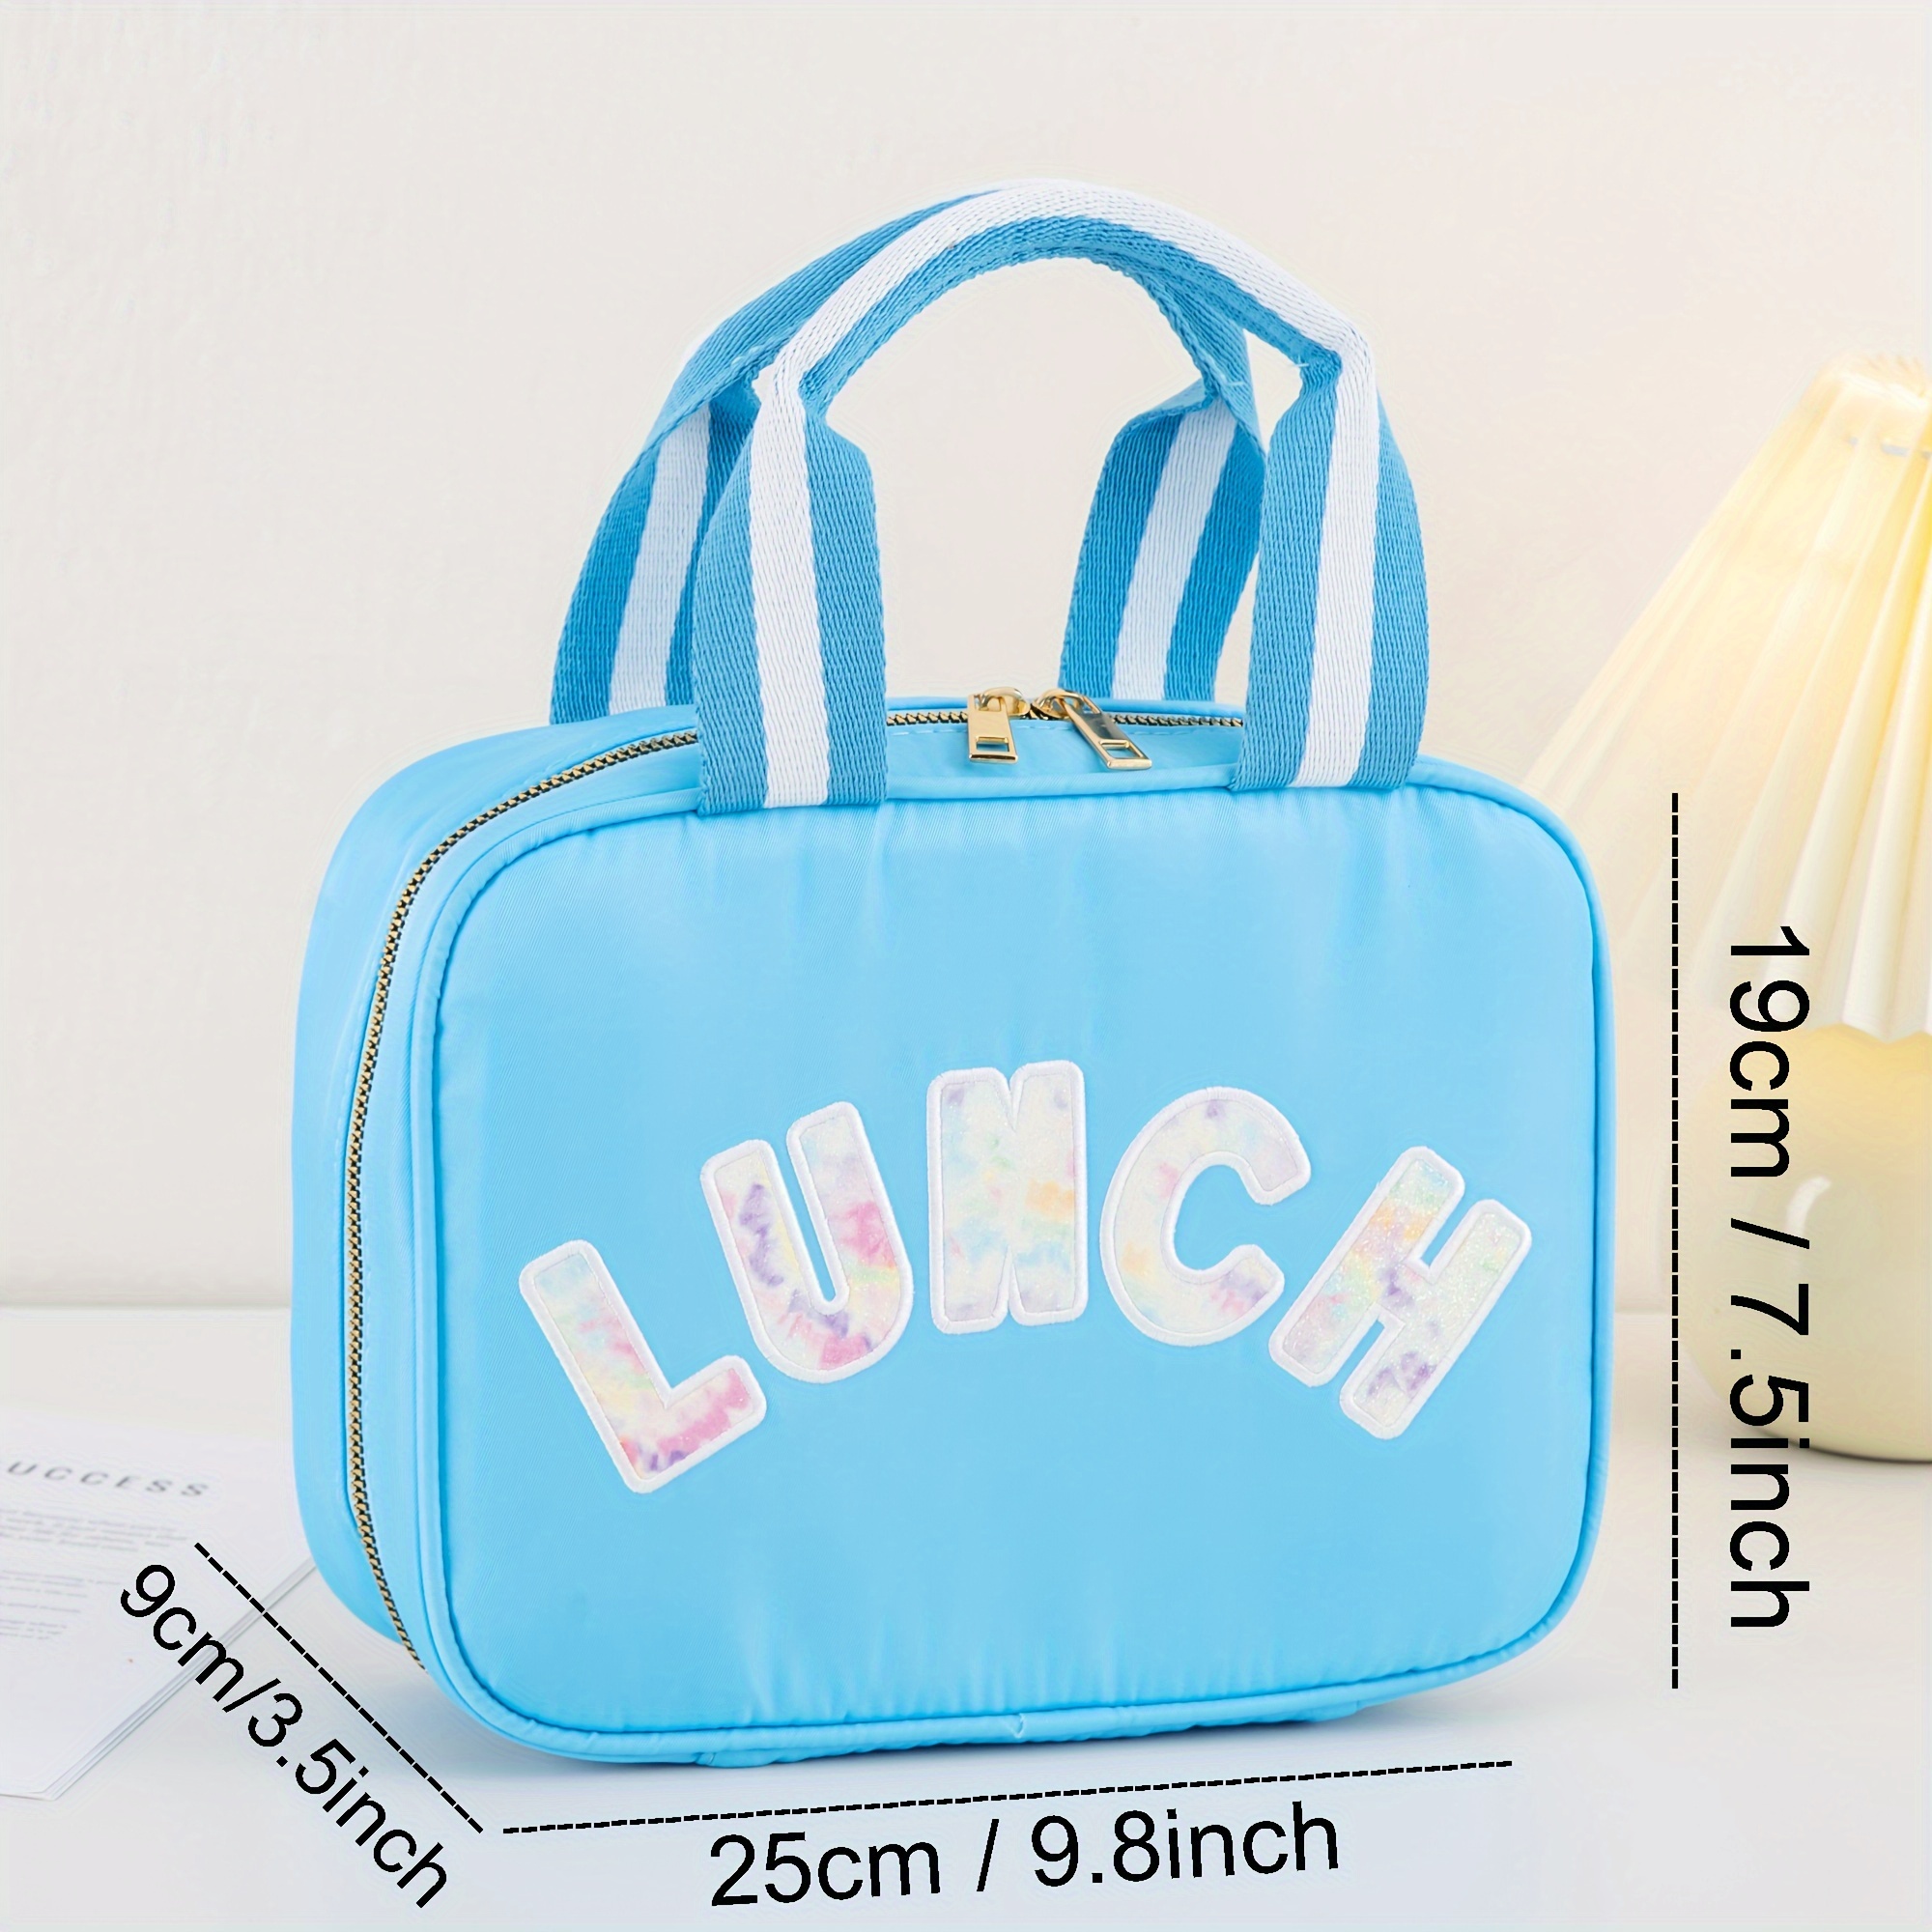 Insulated Lunch Bag With Adjustable Shoulder Strap, Nylon Preppy